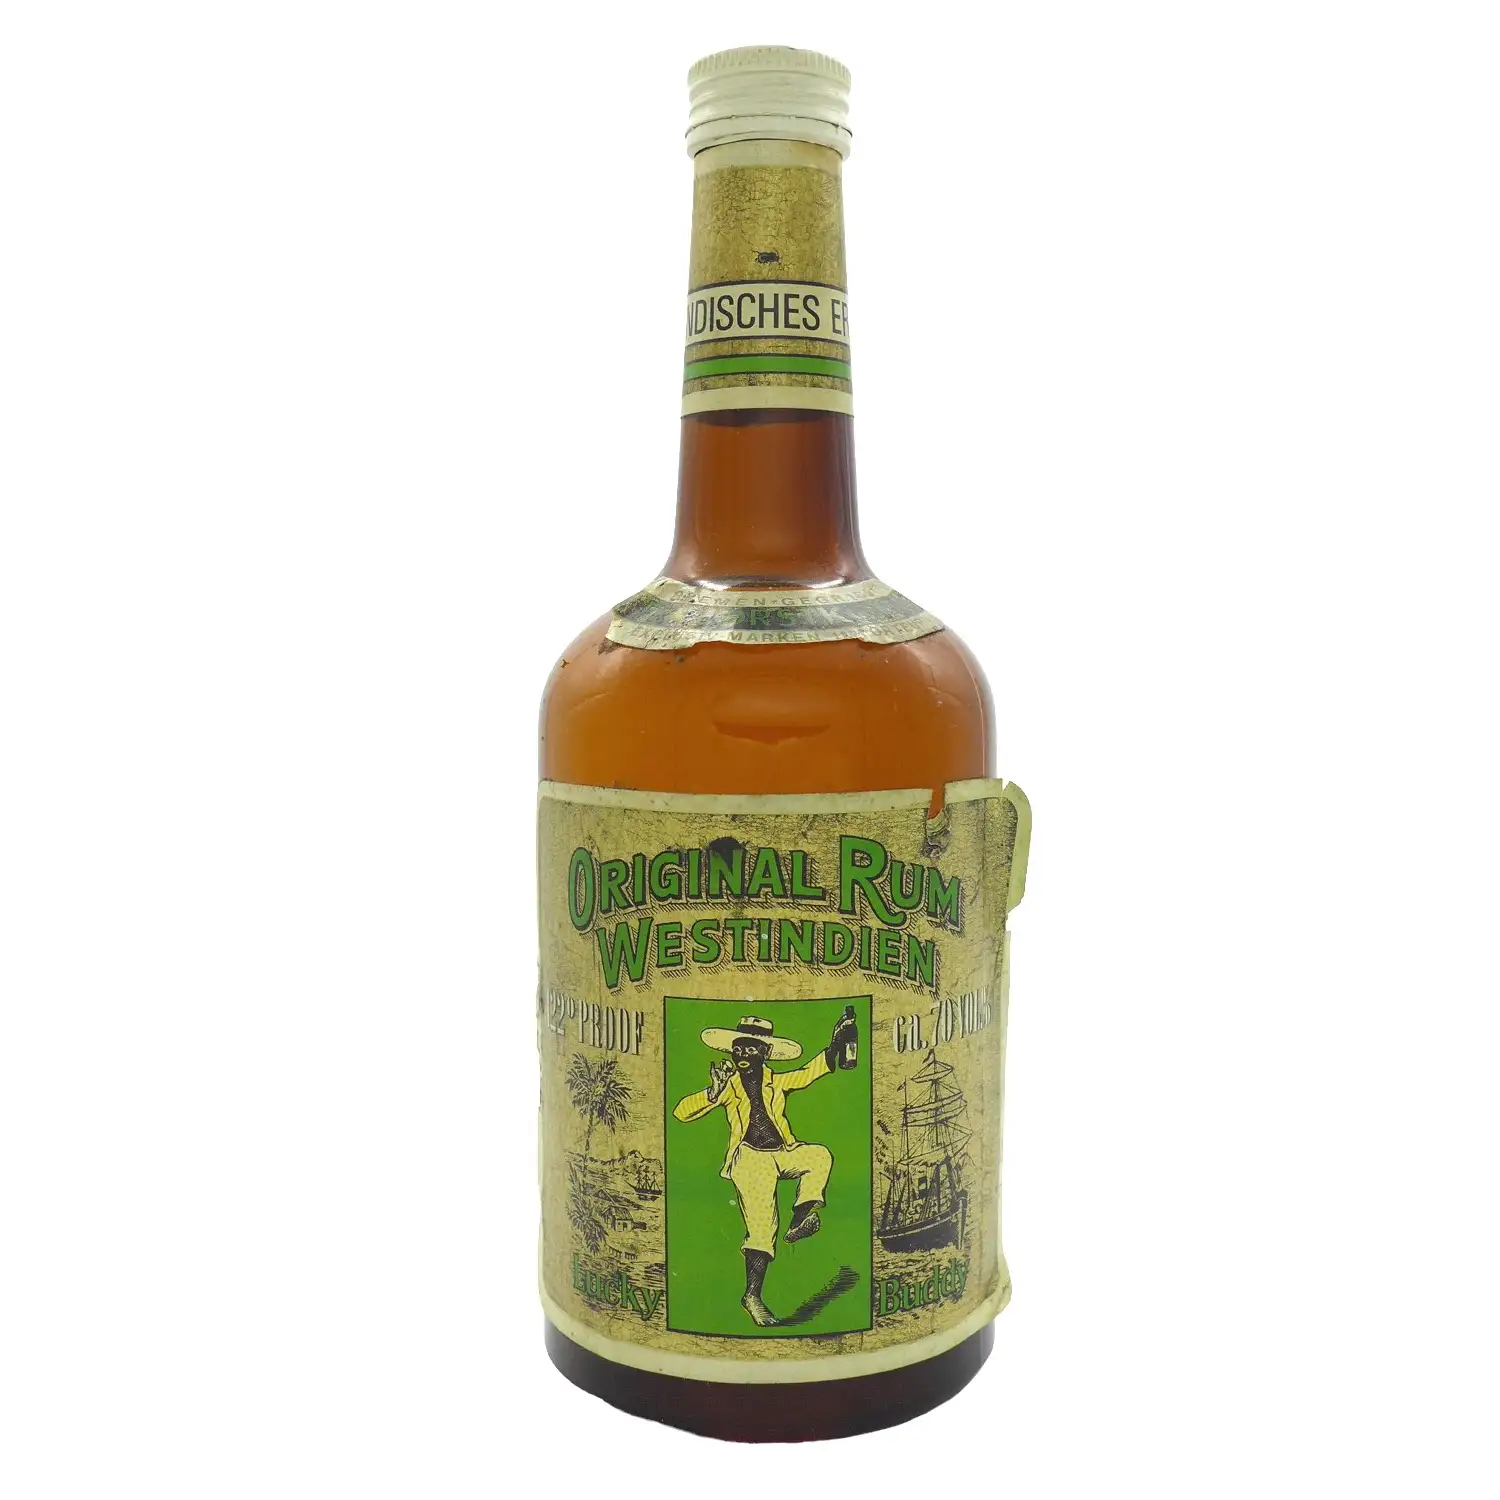 Image of the front of the bottle of the rum Lucky Buddy Original Rum Westindien